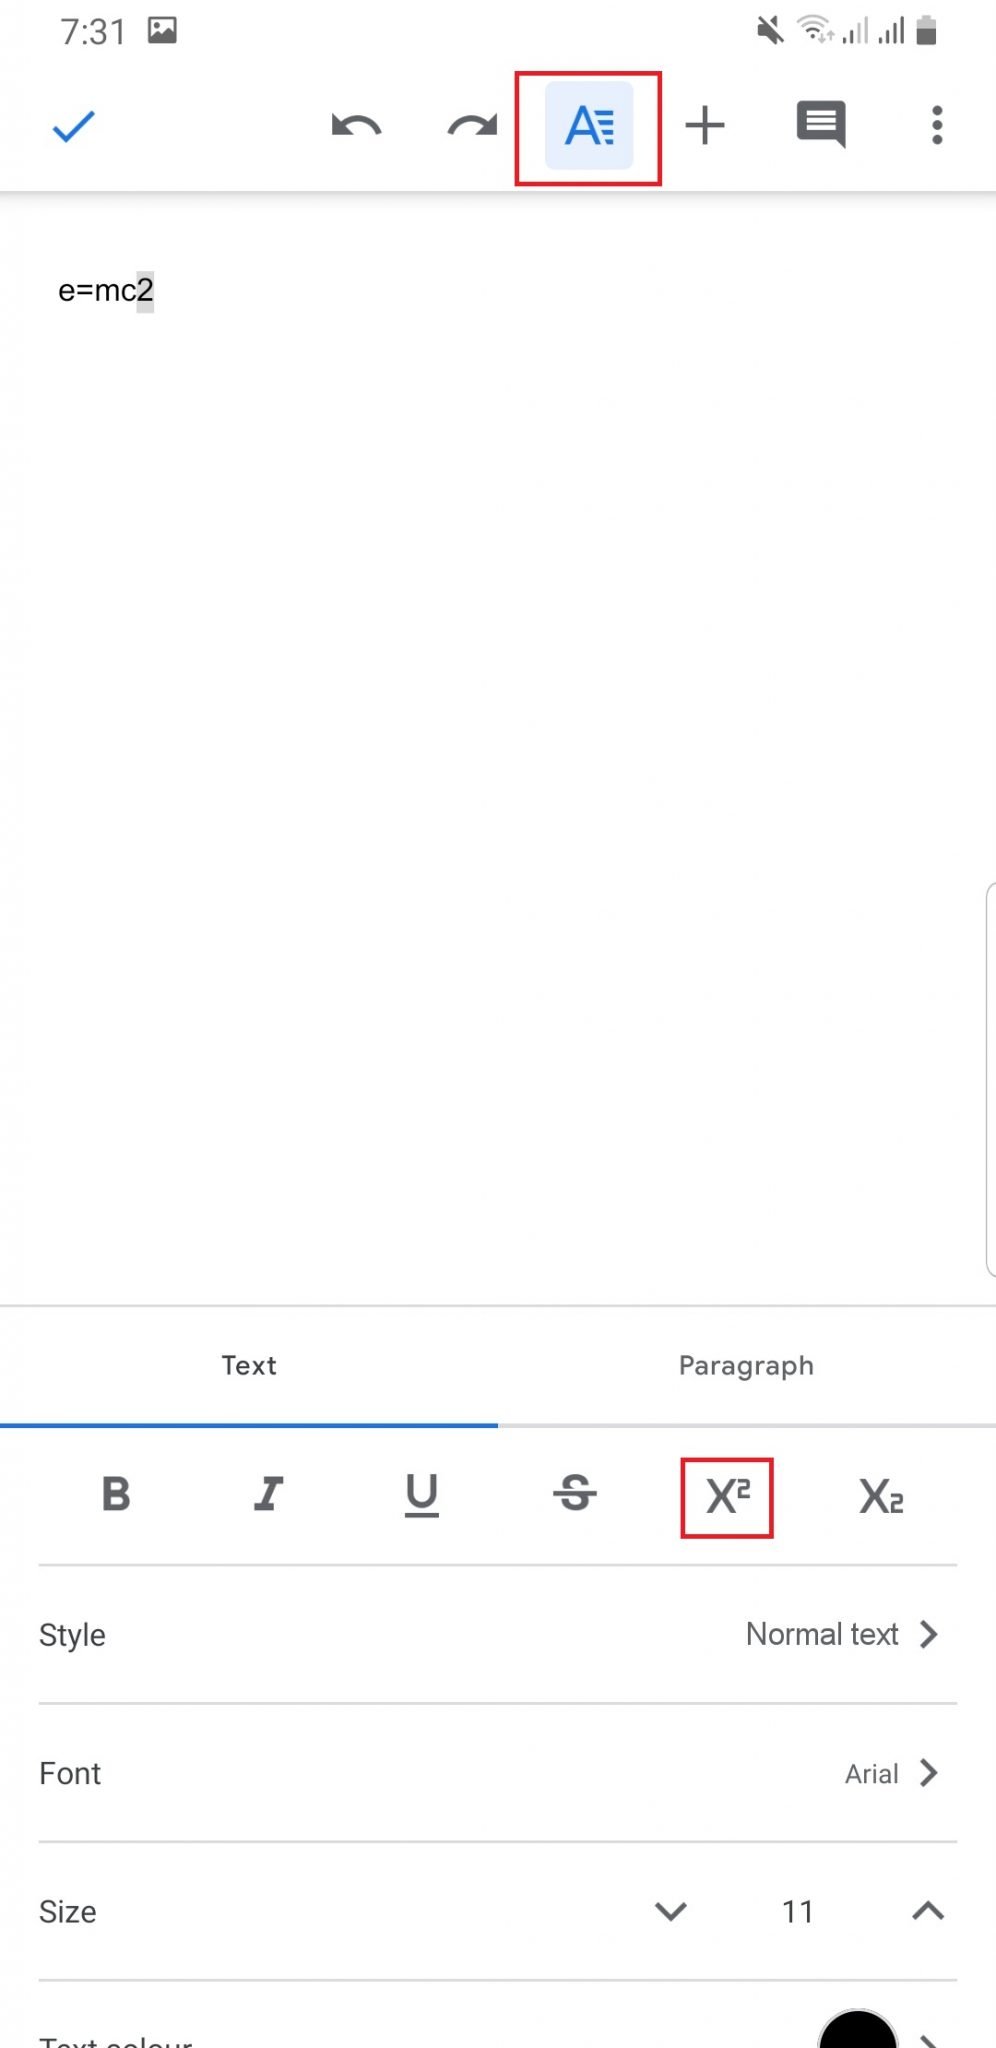 where is home screen for google doc on mac?